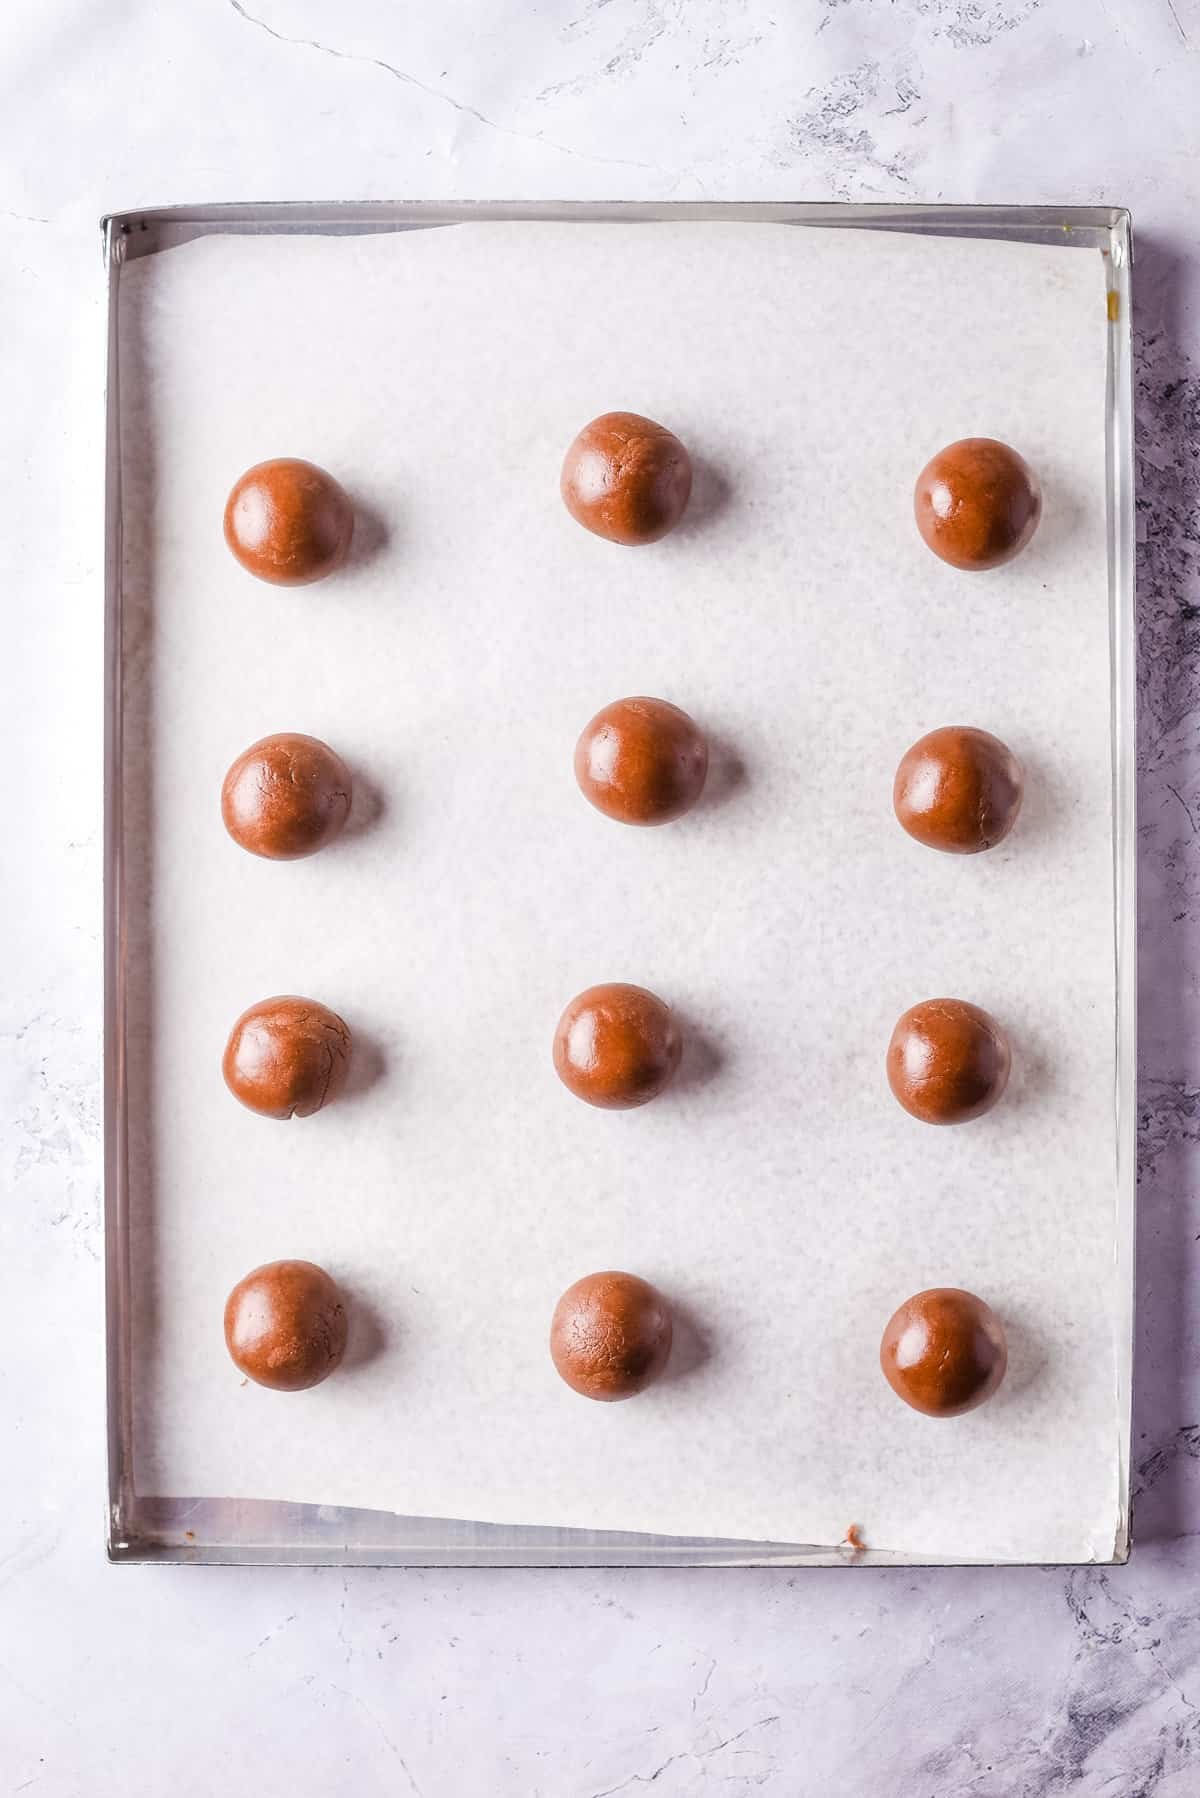 Overhead view of Nutella cookie dough balls on baking sheet lined with parchment paper.